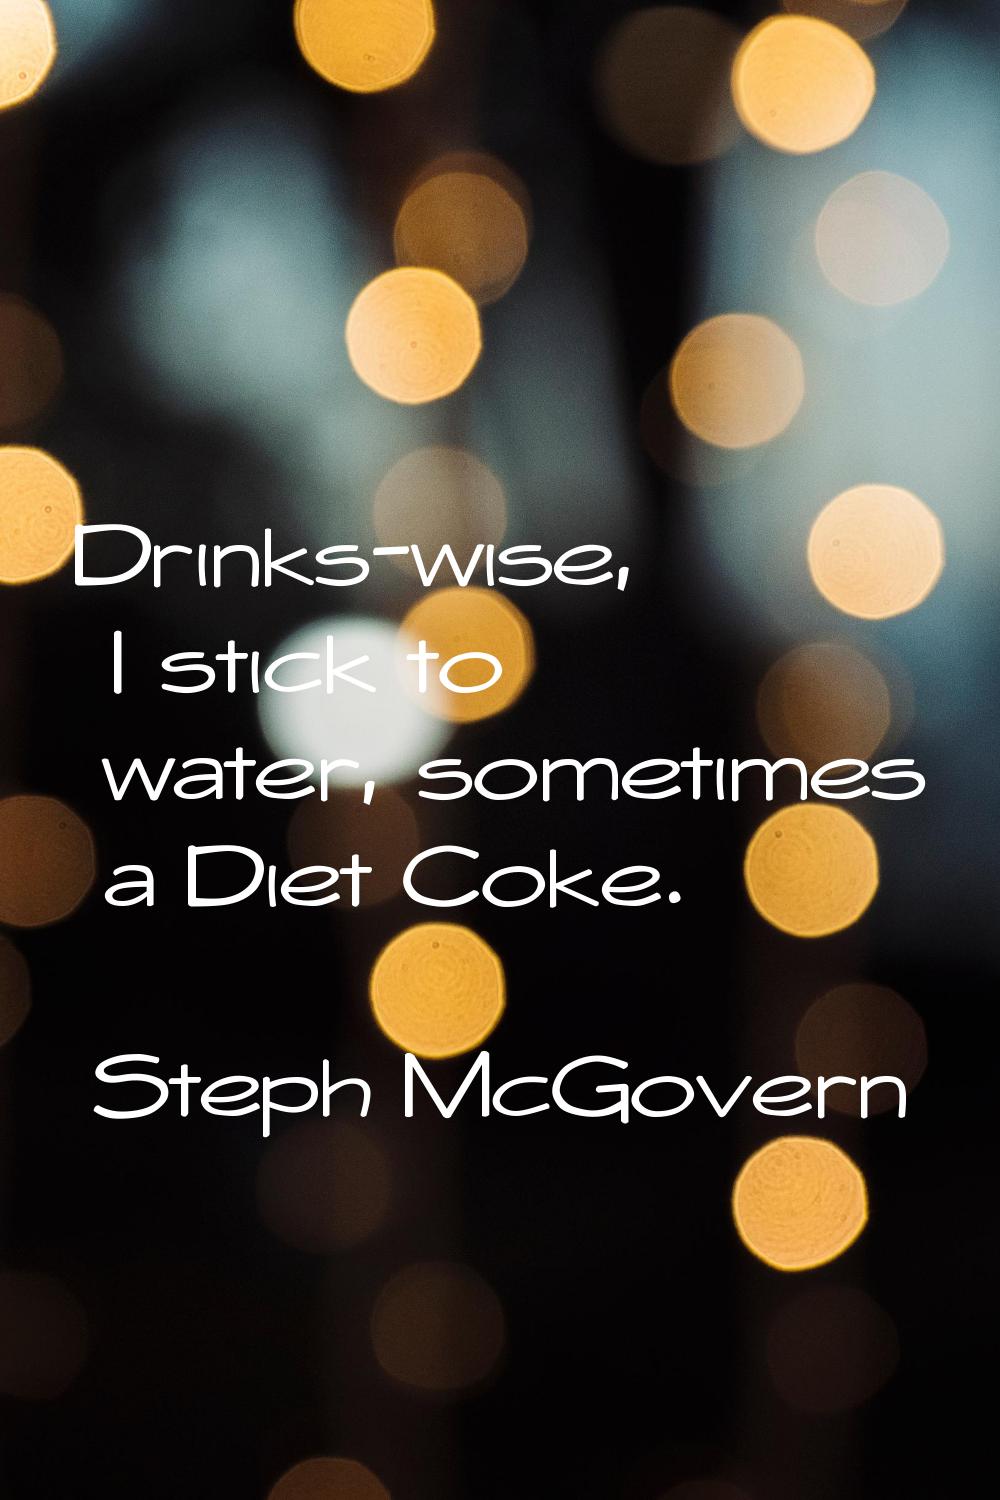 Drinks-wise, I stick to water, sometimes a Diet Coke.